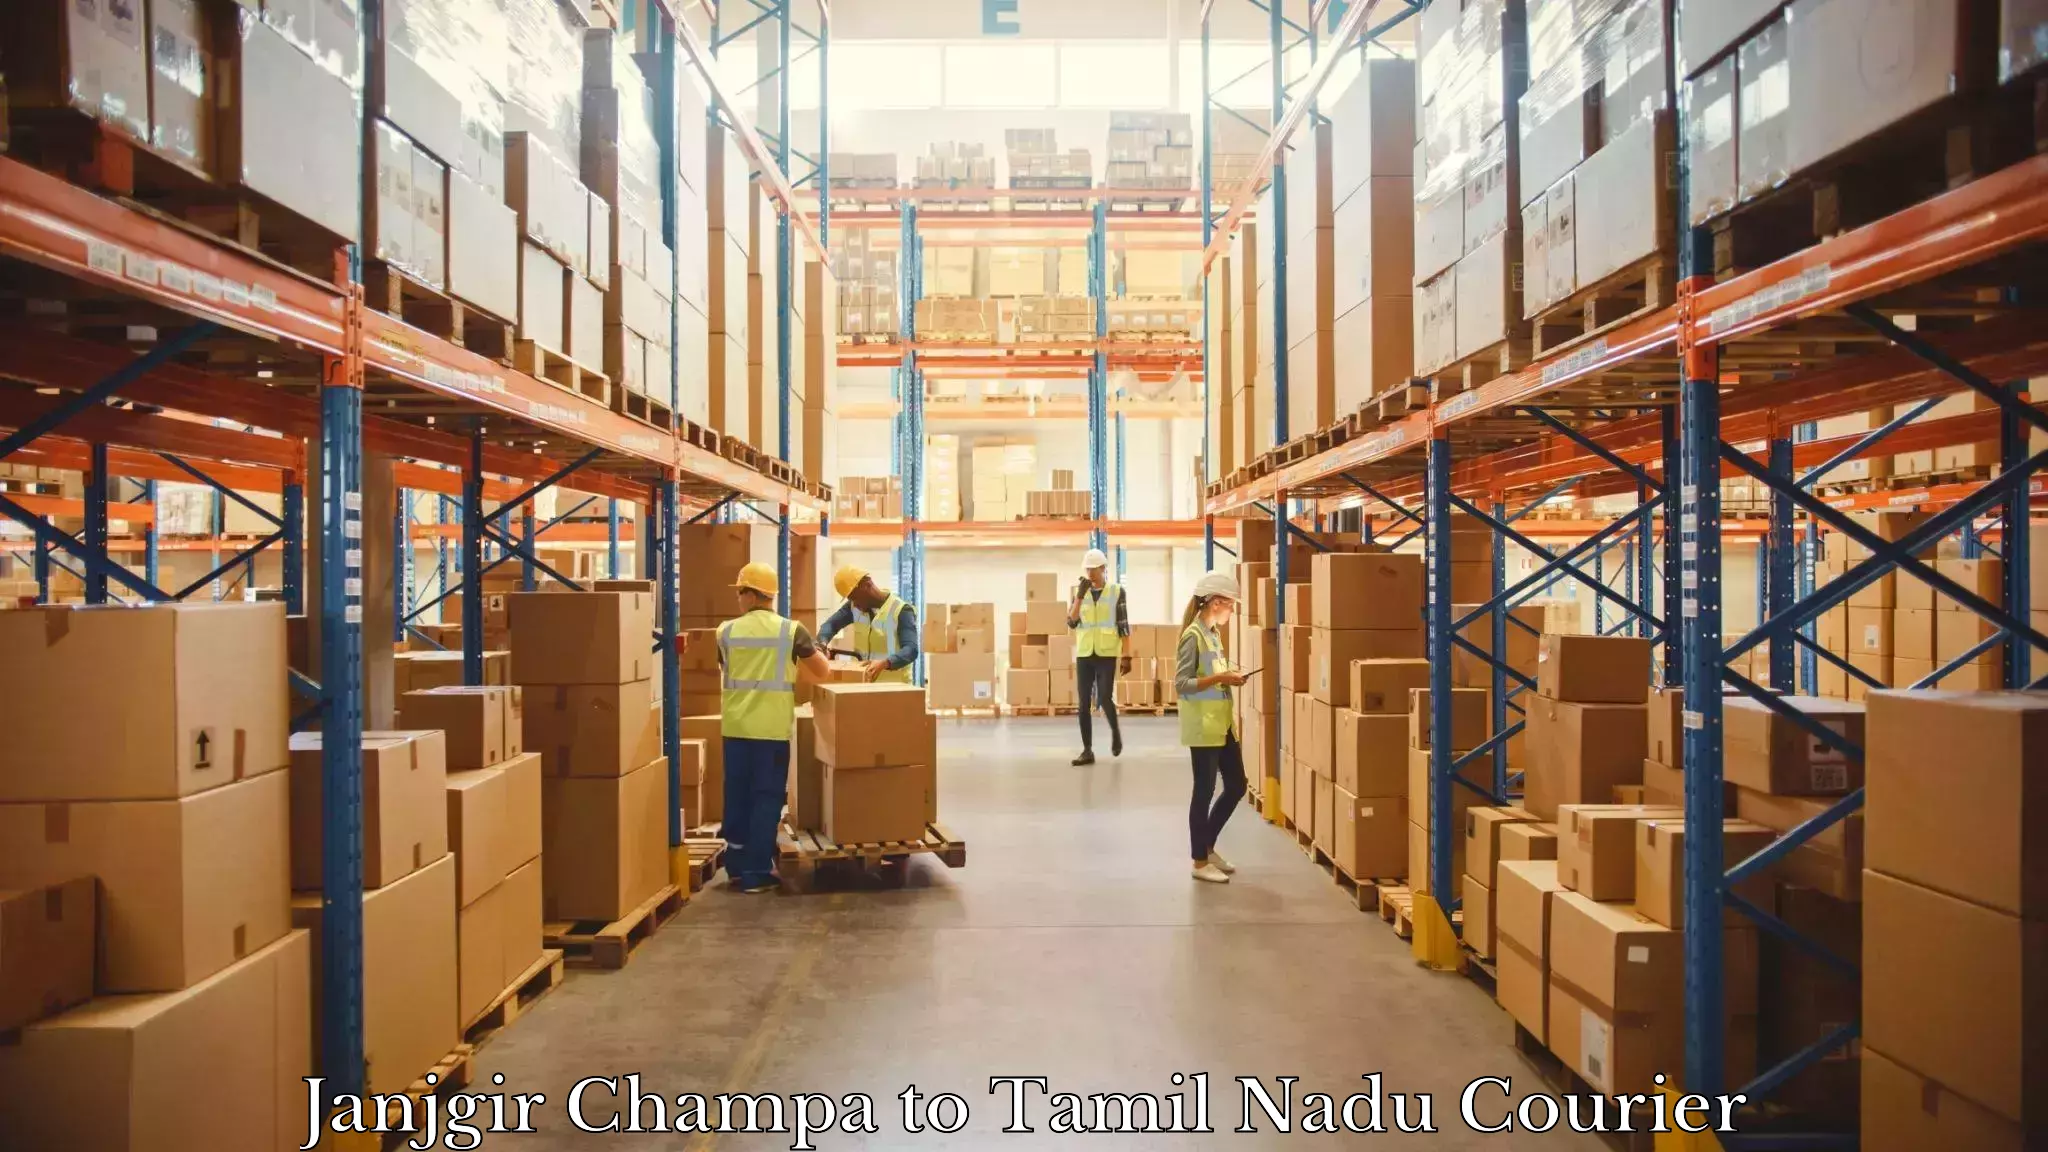 Global courier networks Janjgir Champa to Ranipet